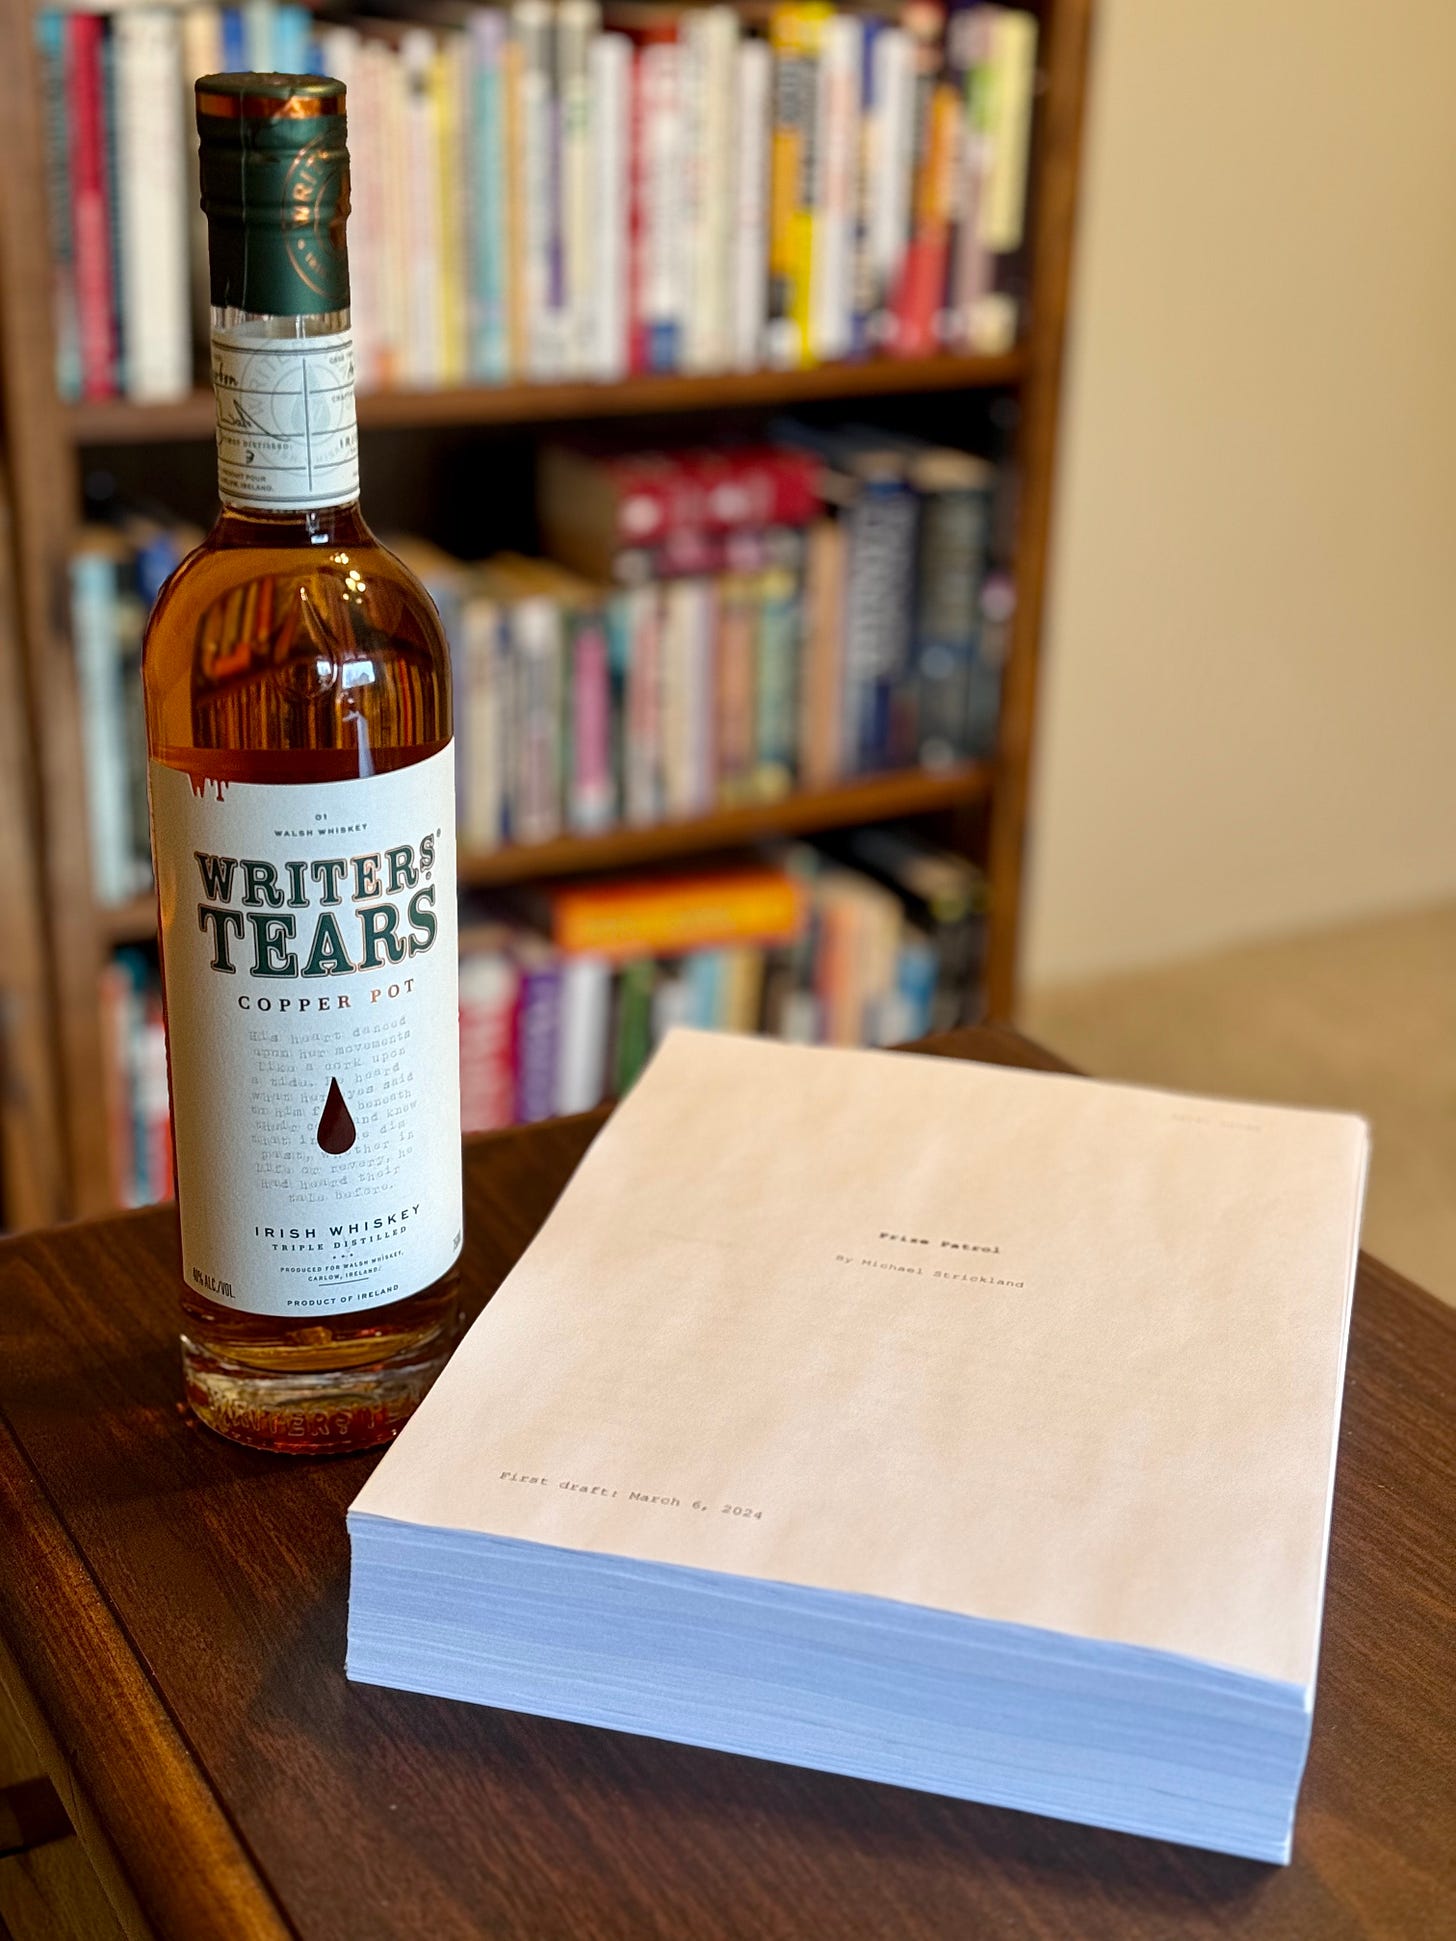 A printed manuscript sits on a desk next to a bottle of Irish whiskey named Writers' Tears